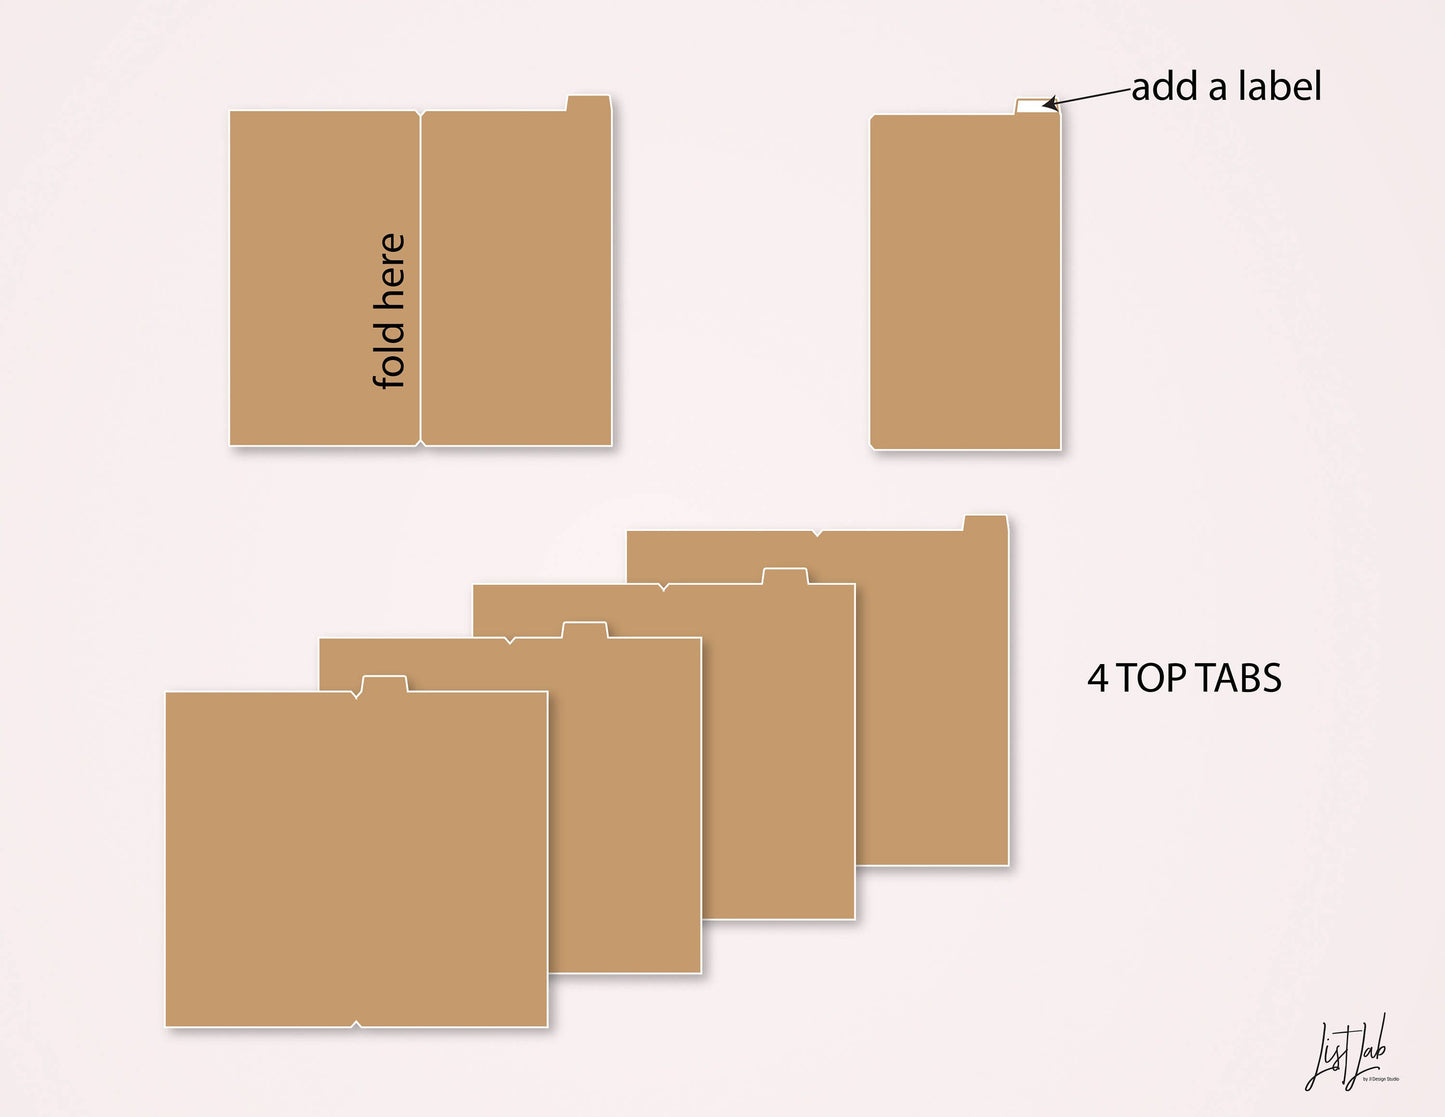 Personal TN TOP Tabbed Covers Kit Cutting Files Set